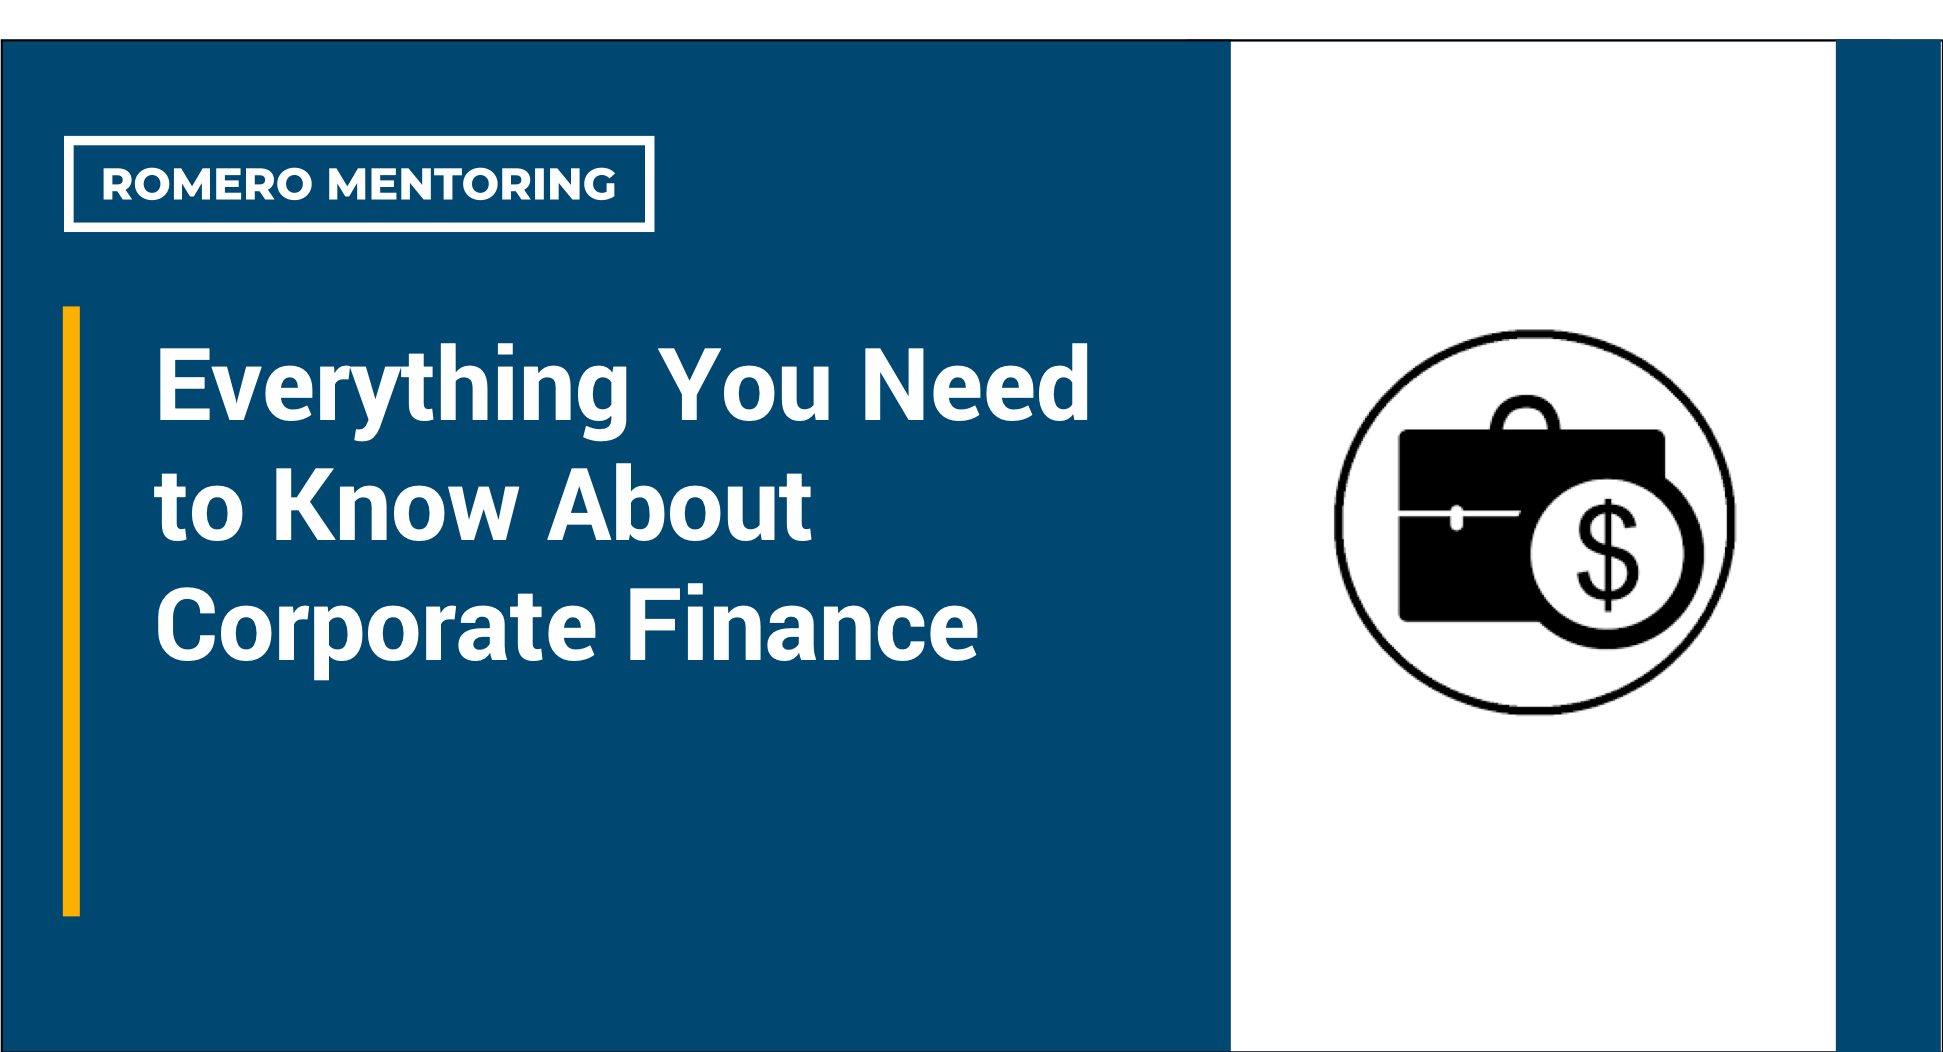 Everything You Need to Know About Corporate Finance